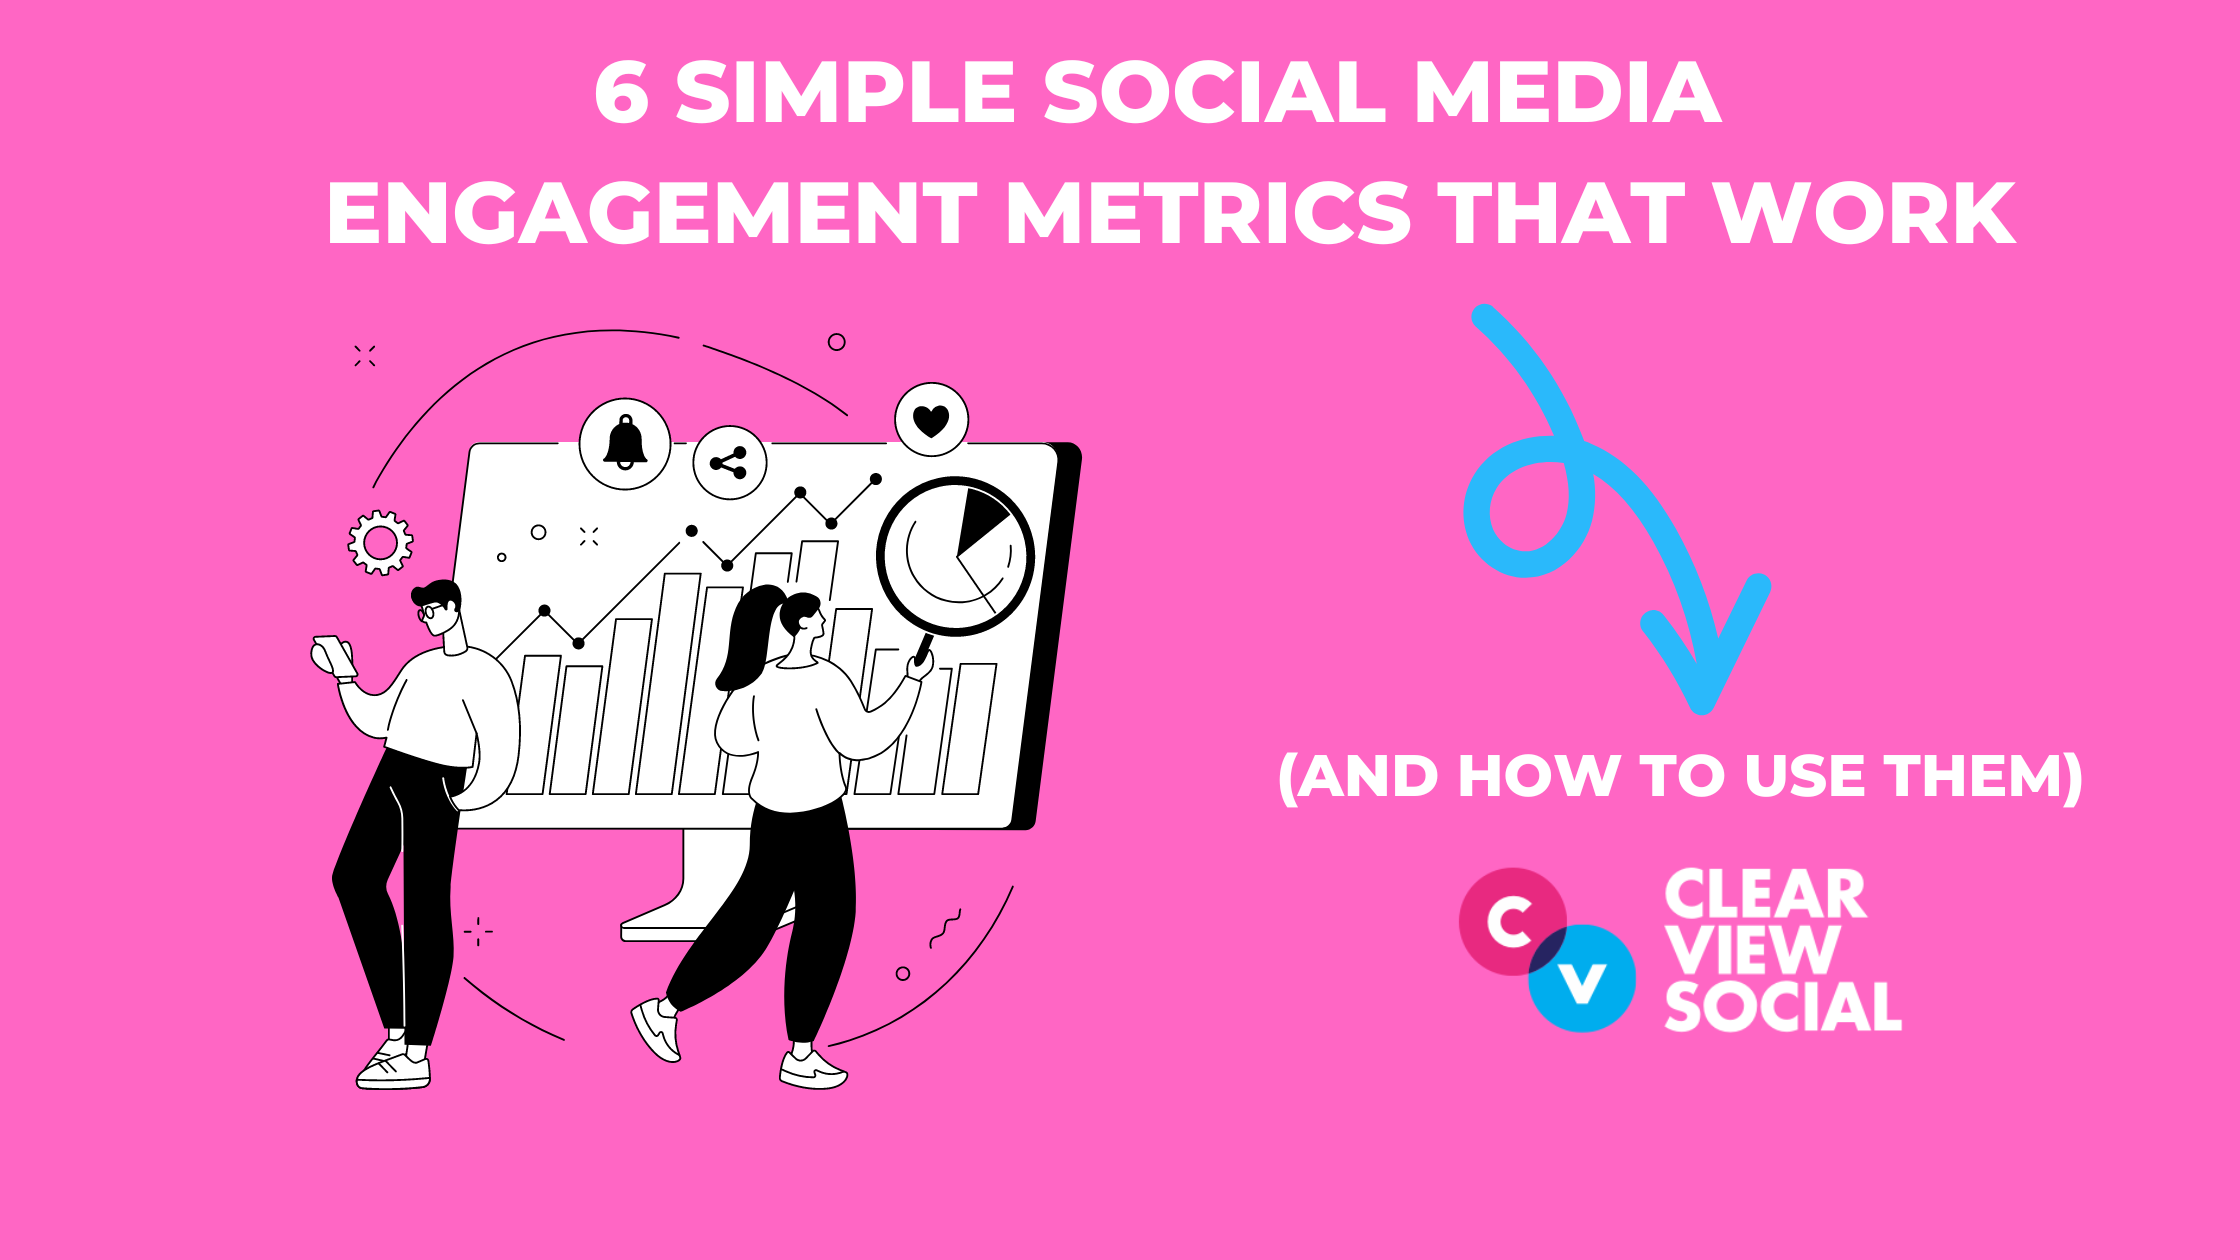 6 Simple Social Media Engagement Metrics That Work (and How to Use Them)